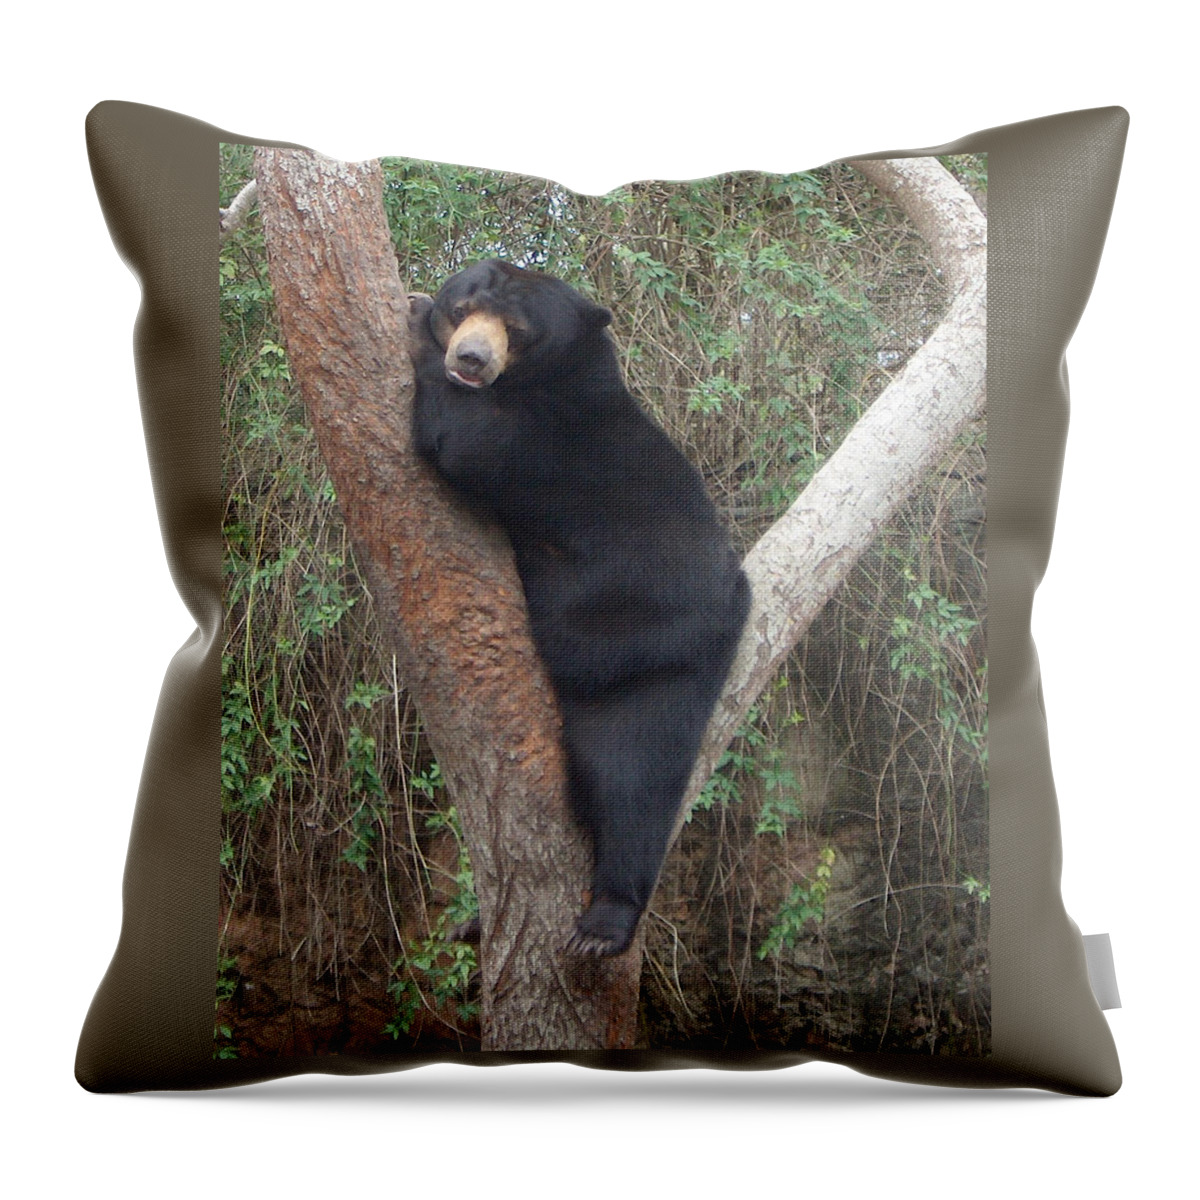 Bear Throw Pillow featuring the photograph Bear In Tree  by Bertie Edwards